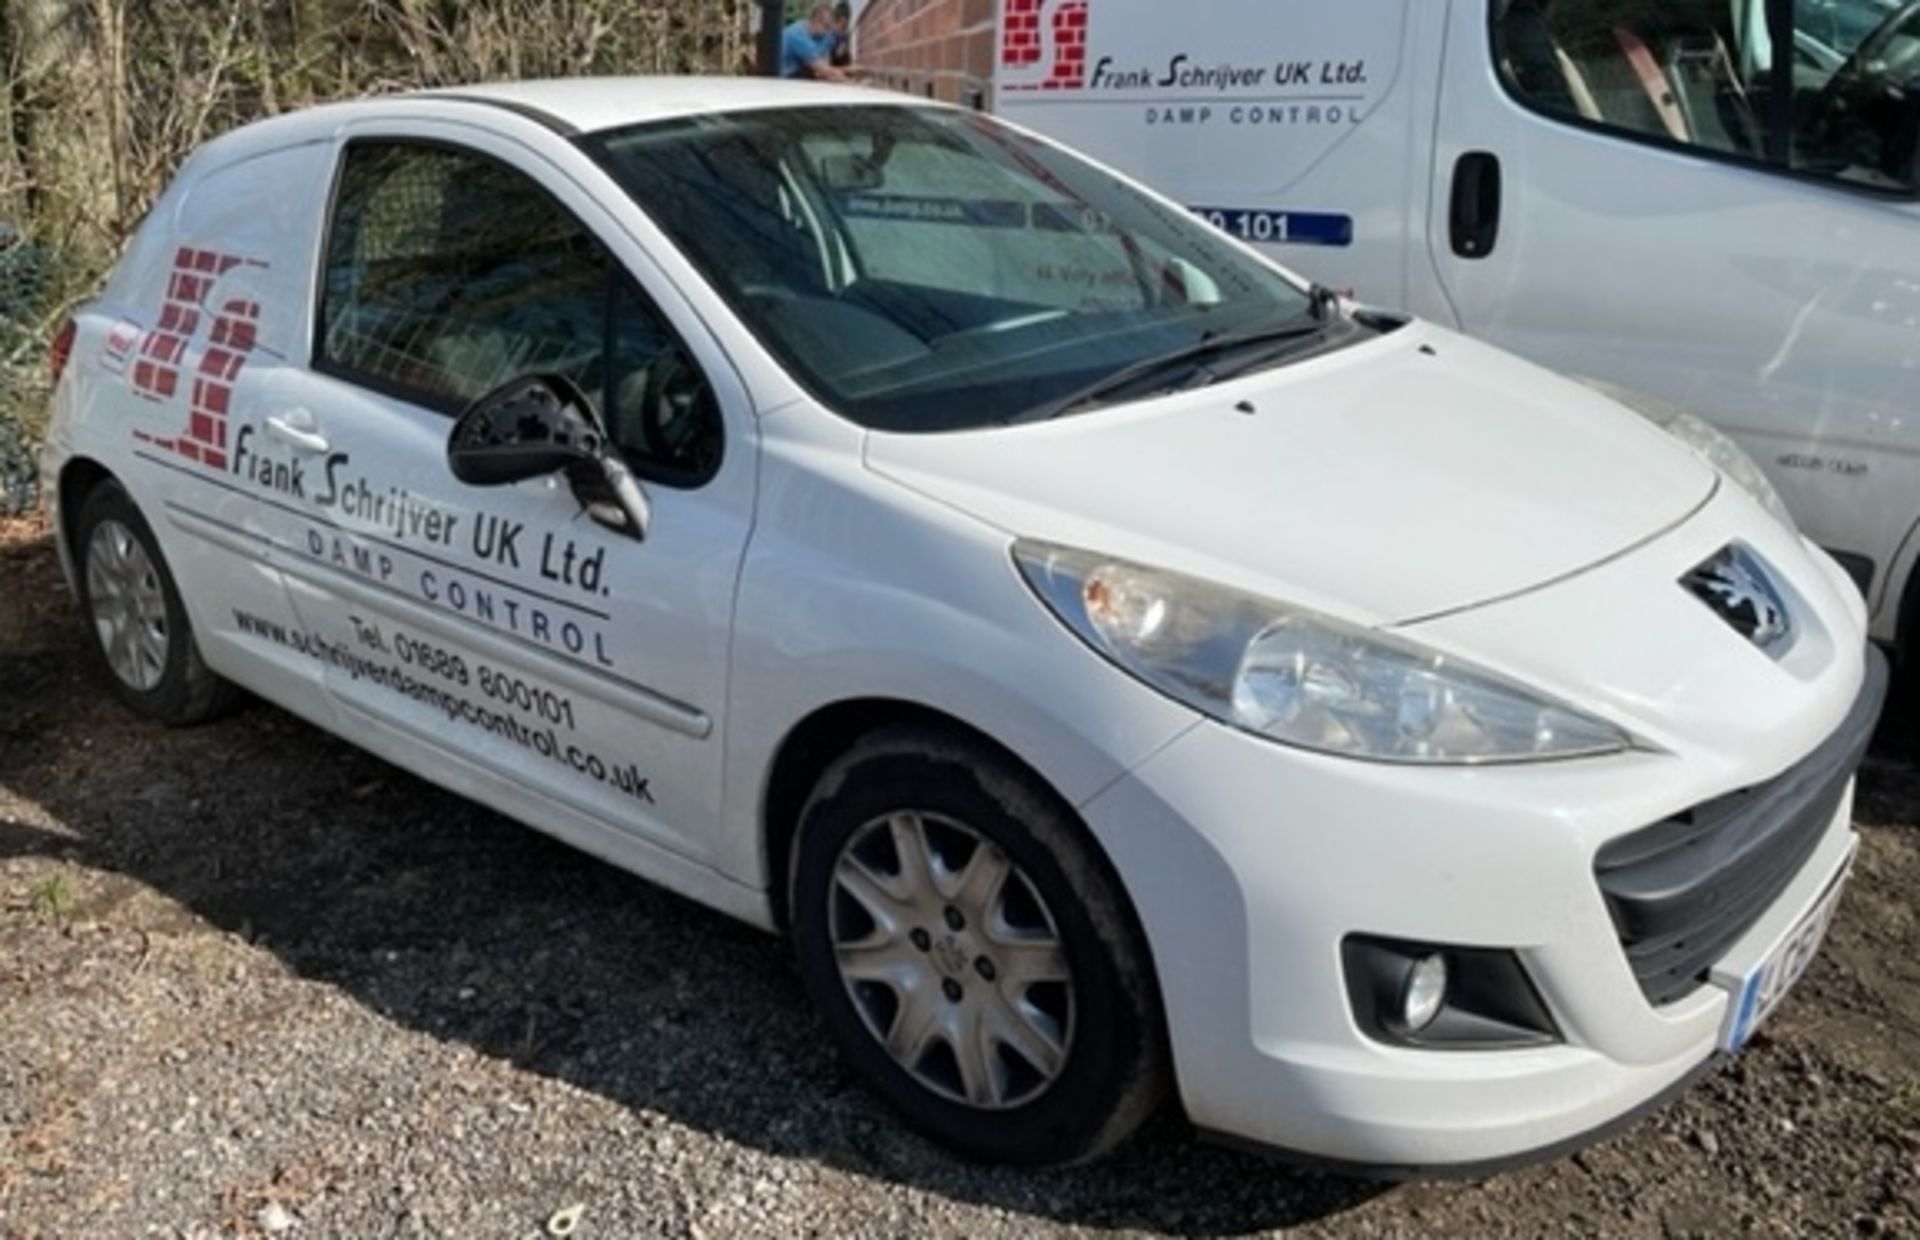 Peugeot 207 1.4 HDi 70 Professional Van, Registration LC61 YON, First Registered 23rd January